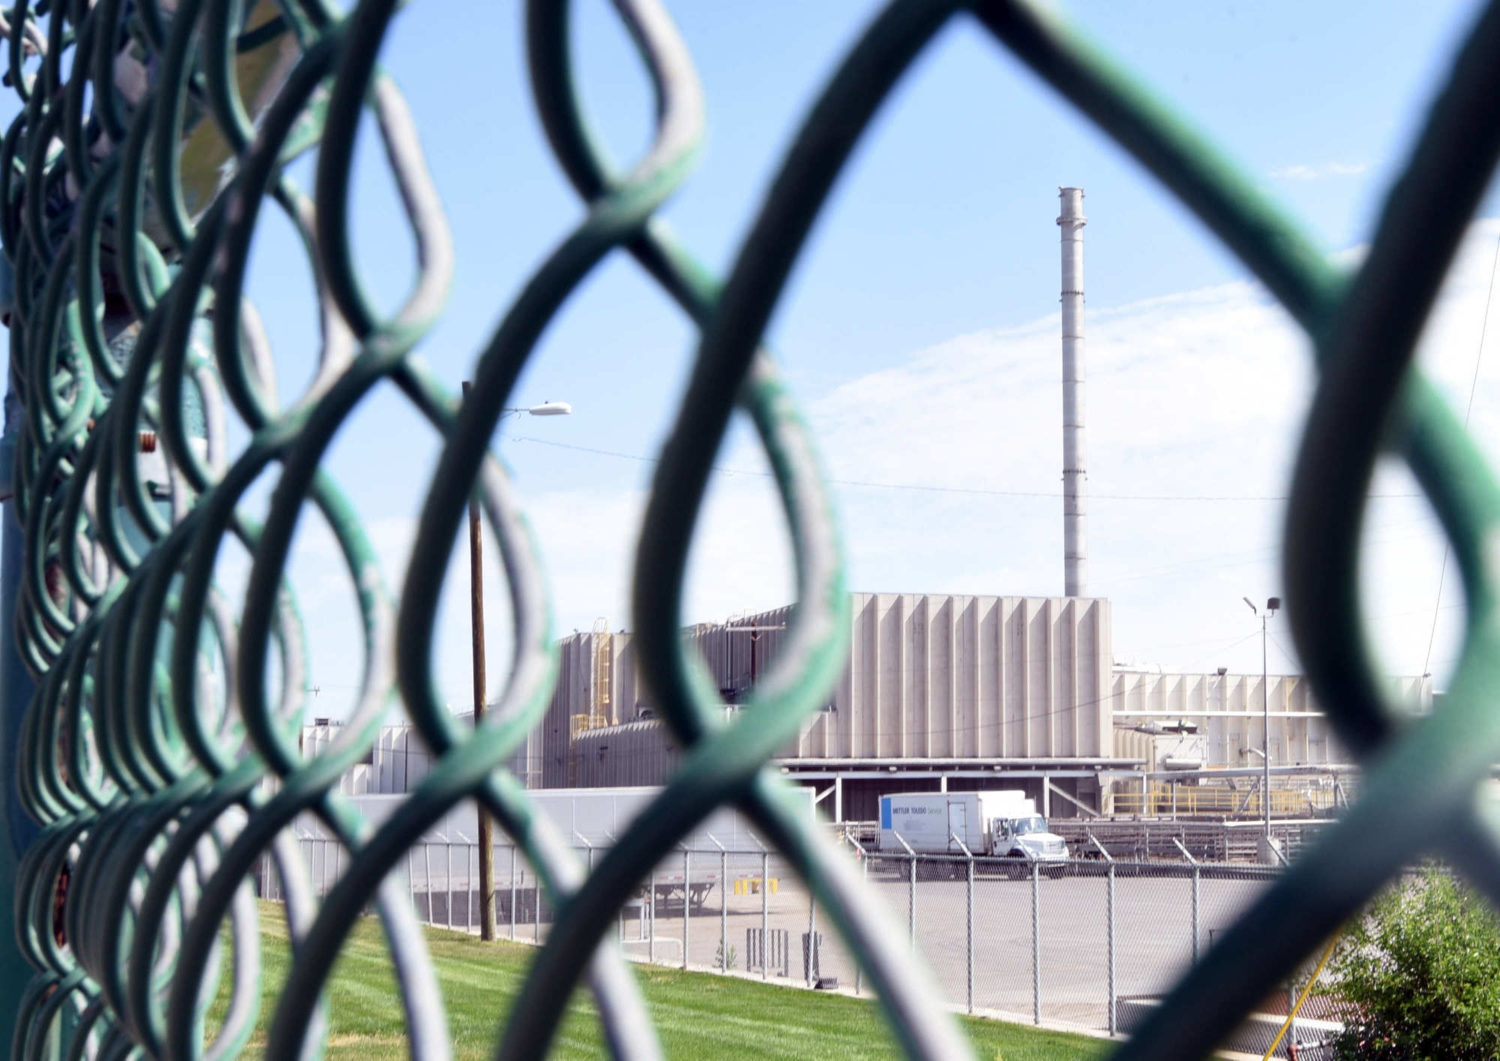 A chain link fence separates the JBS facility from the nearby highway.